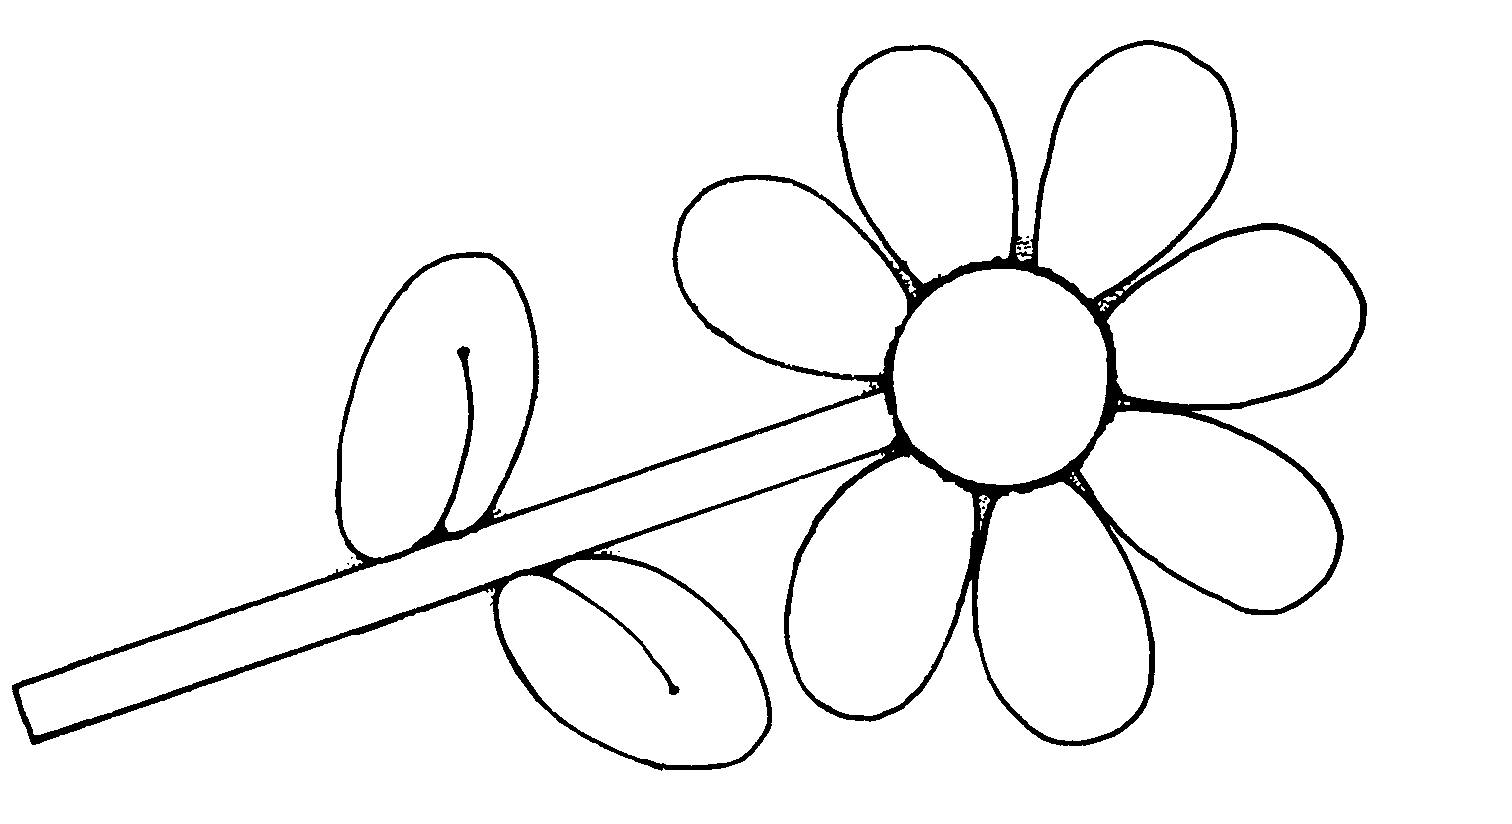 Sunflower Petal Black And White Clipart - ClipArt Best